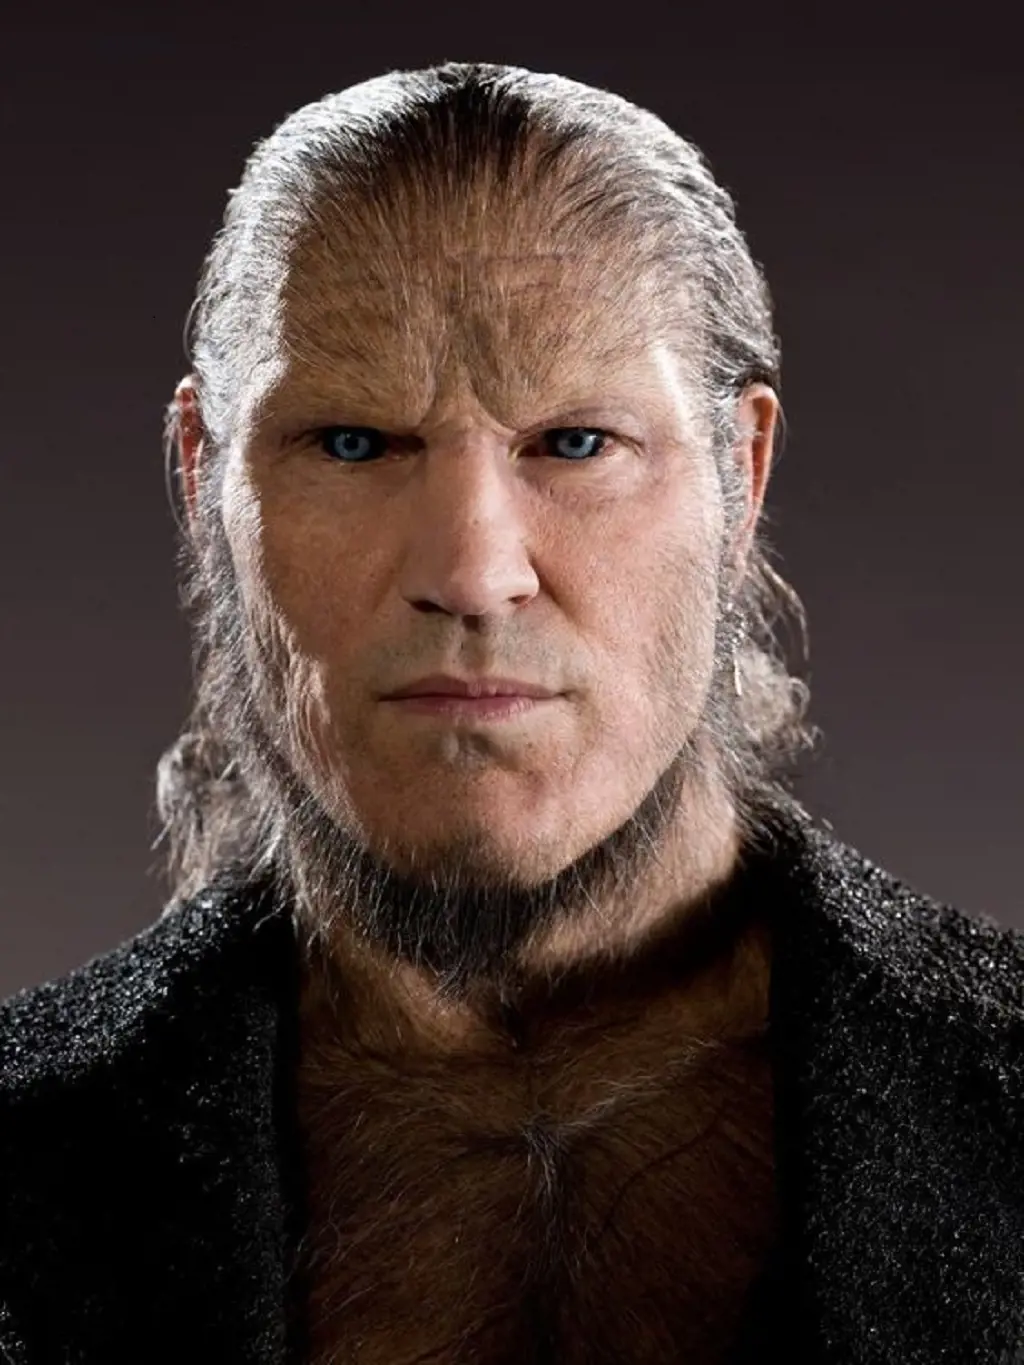 Fenrir Greyback is a werewolf and supporter of Lord Voldemort who viciously attacks children